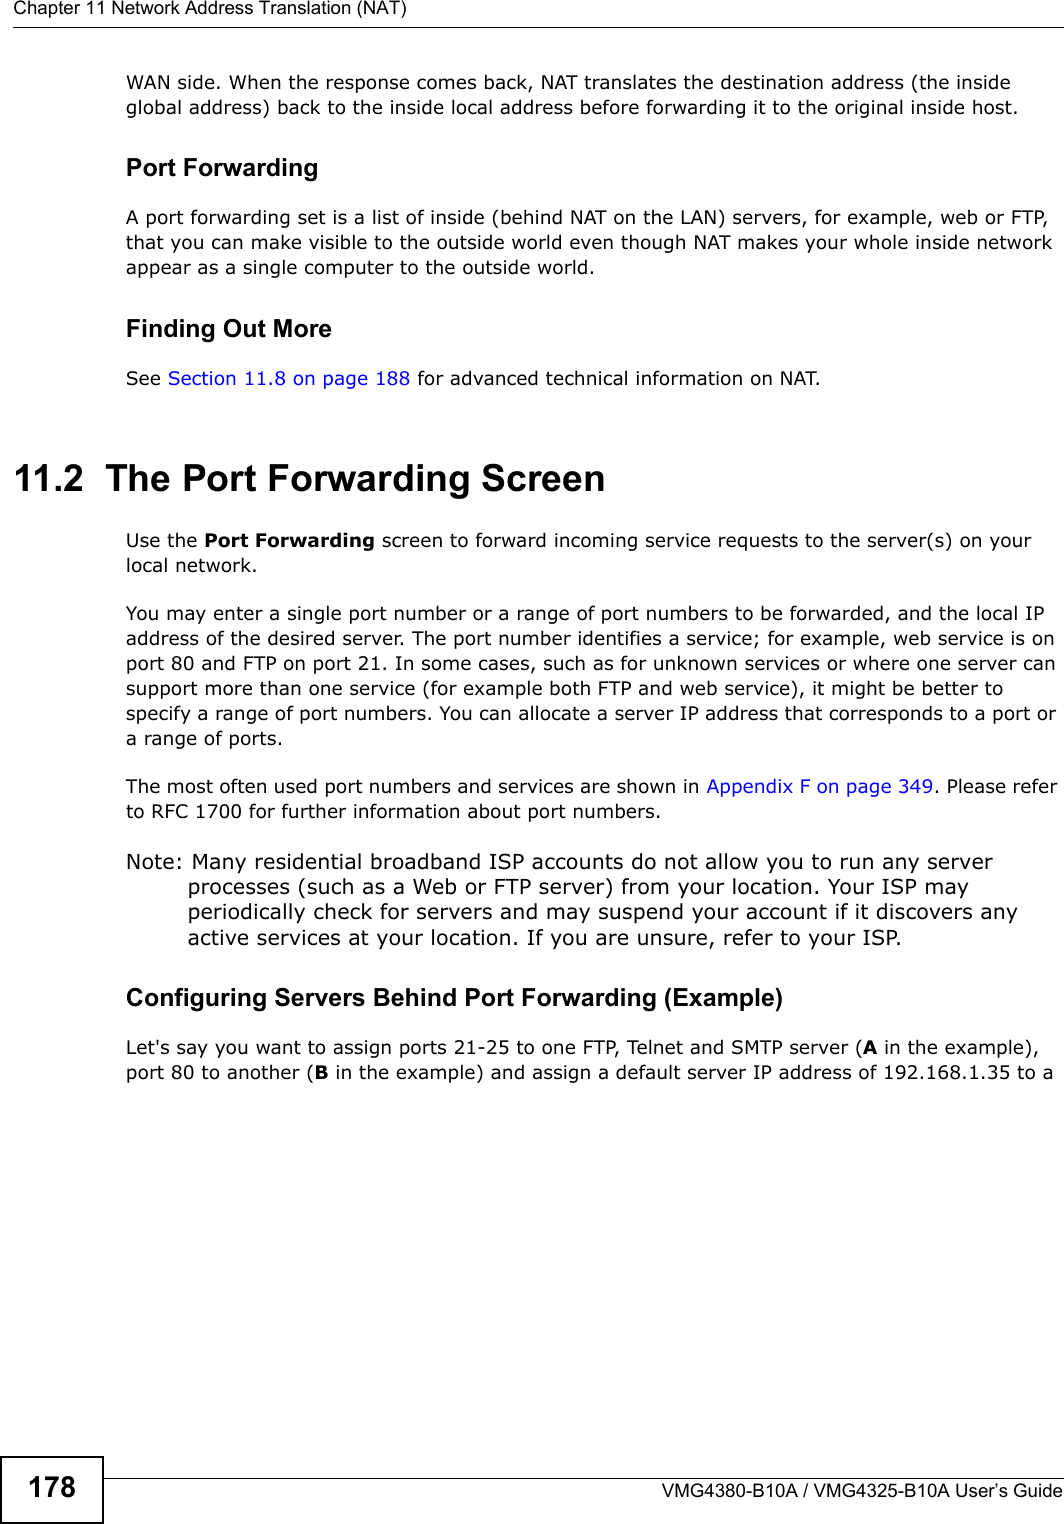 Chapter 11 Network Address Translation (NAT)VMG4380-B10A / VMG4325-B10A User’s Guide178WAN side. When the response comes back, NAT translates the destination address (the inside global address) back to the inside local address before forwarding it to the original inside host.Port ForwardingA port forwarding set is a list of inside (behind NAT on the LAN) servers, for example, web or FTP,that you can make visible to the outside world even though NAT makes your whole inside network appear as a single computer to the outside world.Finding Out MoreSee Section 11.8 on page 188 for advanced technical information on NAT.11.2  The Port Forwarding Screen Use the Port Forwarding screen to forward incoming service requests to the server(s) on your local network.You may enter a single port number or a range of port numbers to be forwarded, and the local IPaddress of the desired server. The port number identifies a service; for example, web service is on port 80 and FTP on port 21. In some cases, such as for unknown services or where one server can support more than one service (for example both FTP and web service), it might be better to specify a range of port numbers. You can allocate a server IP address that corresponds to a port or a range of ports.The most often used port numbers and services are shown in Appendix F on page 349. Please refer to RFC 1700 for further information about port numbers. Note: Many residential broadband ISP accounts do not allow you to run any server processes (such as a Web or FTP server) from your location. Your ISP may periodically check for servers and may suspend your account if it discovers any active services at your location. If you are unsure, refer to your ISP.Configuring Servers Behind Port Forwarding (Example)Let&apos;s say you want to assign ports 21-25 to one FTP, Telnet and SMTP server (A in the example),port 80 to another (B in the example) and assign a default server IP address of 192.168.1.35 to a 